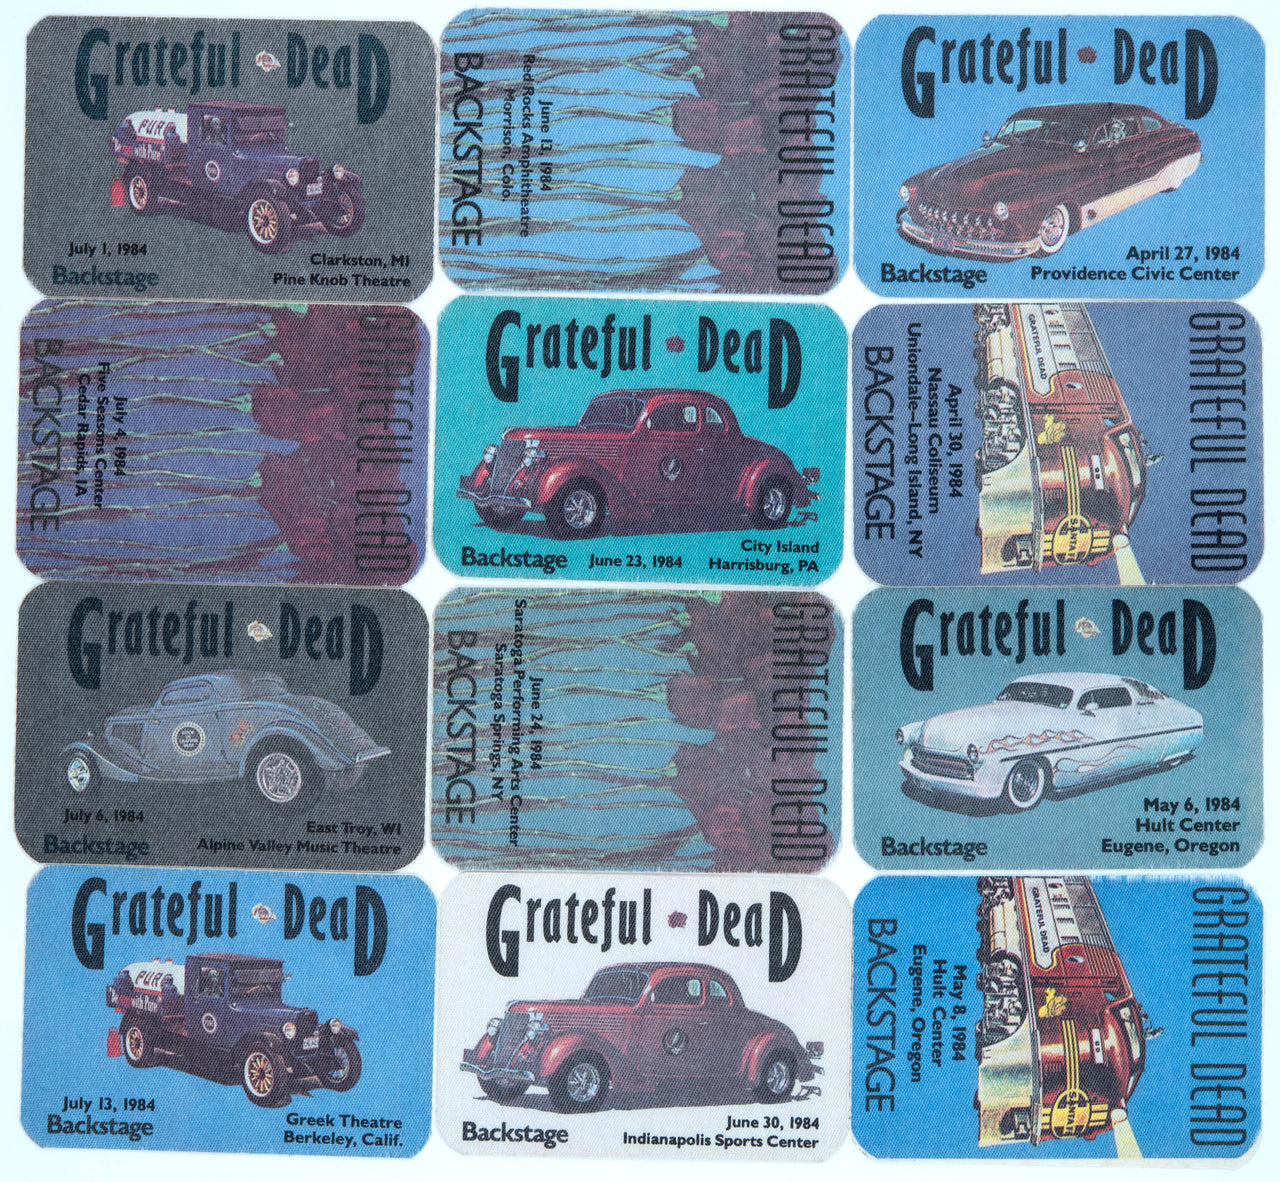 Grateful Dead Backstage Passes (4/27/1984 - 7/13/1984) from Dan Healy